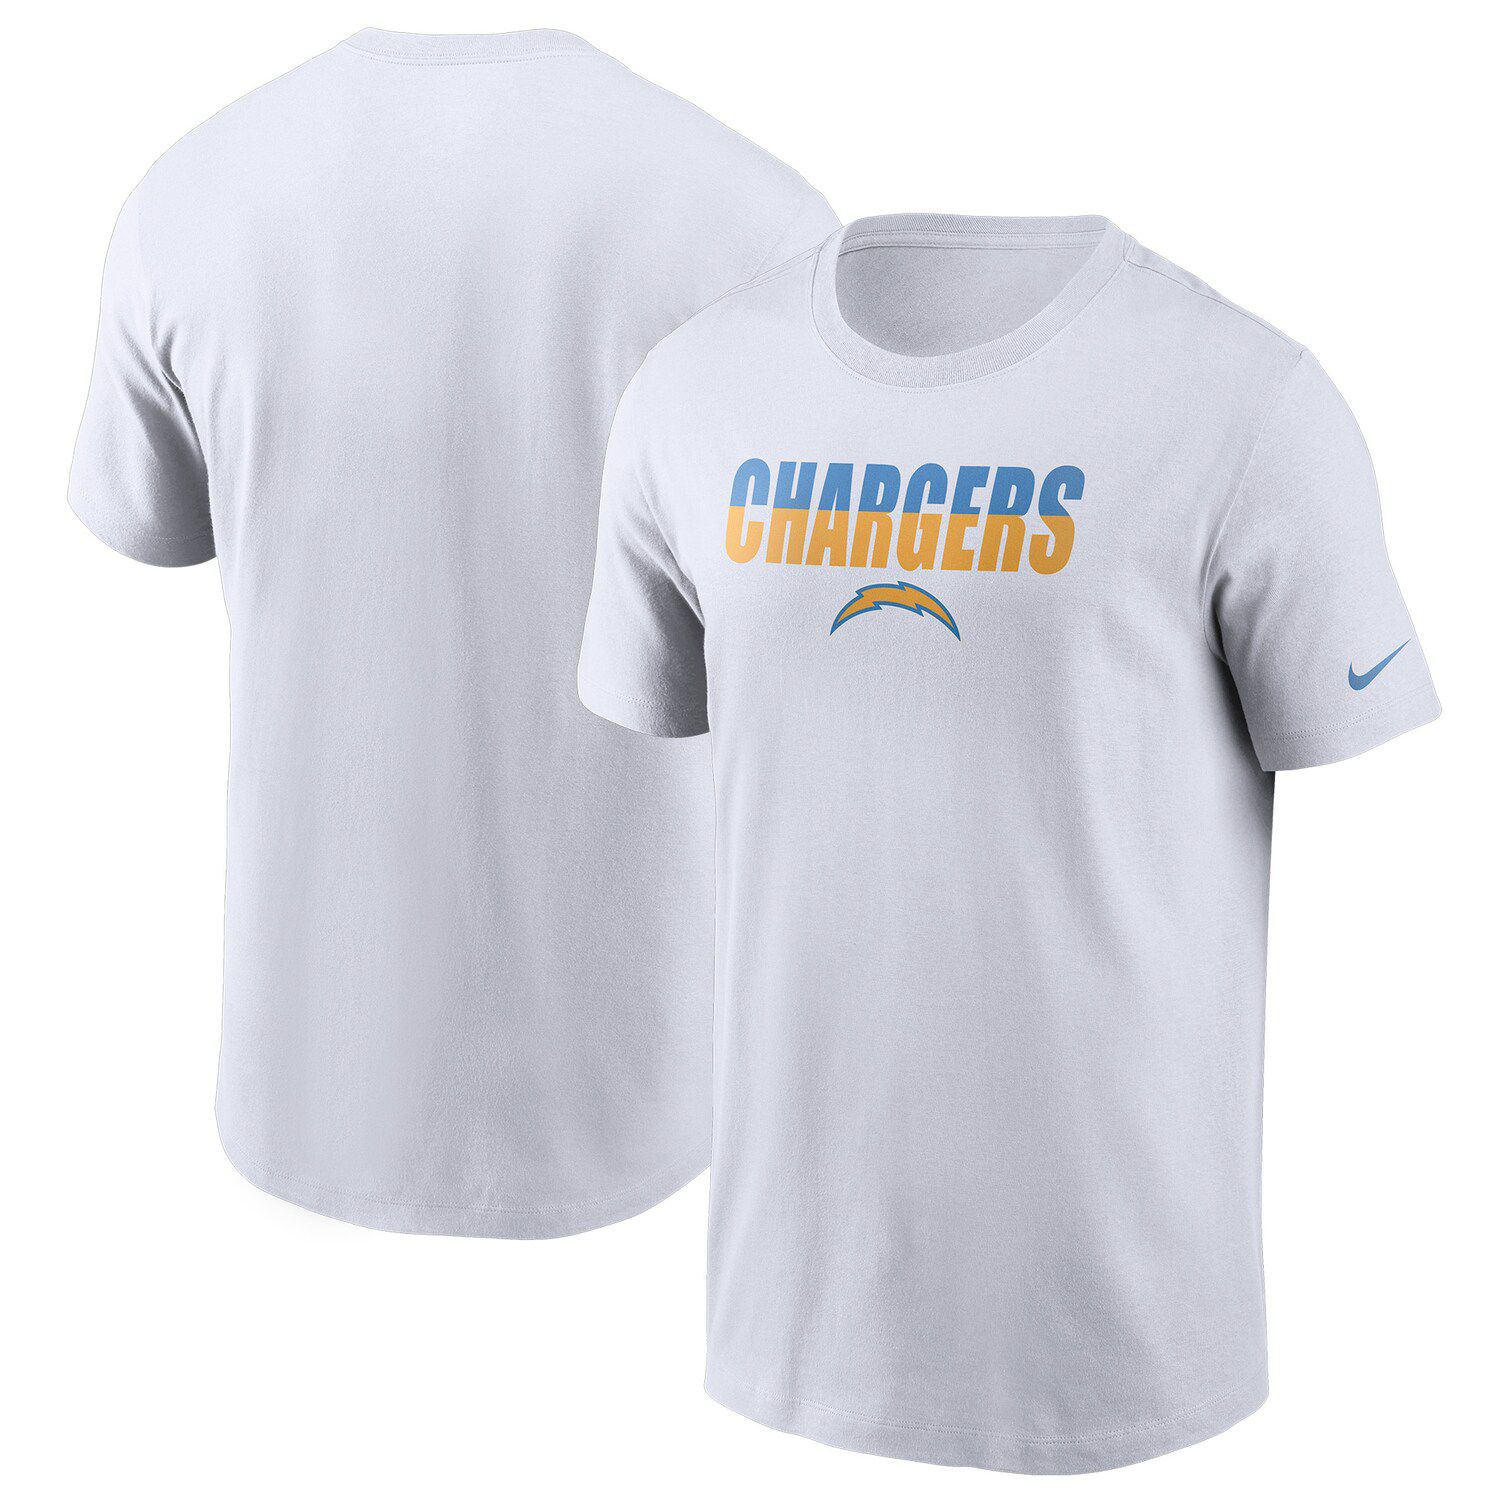 white charger shirts